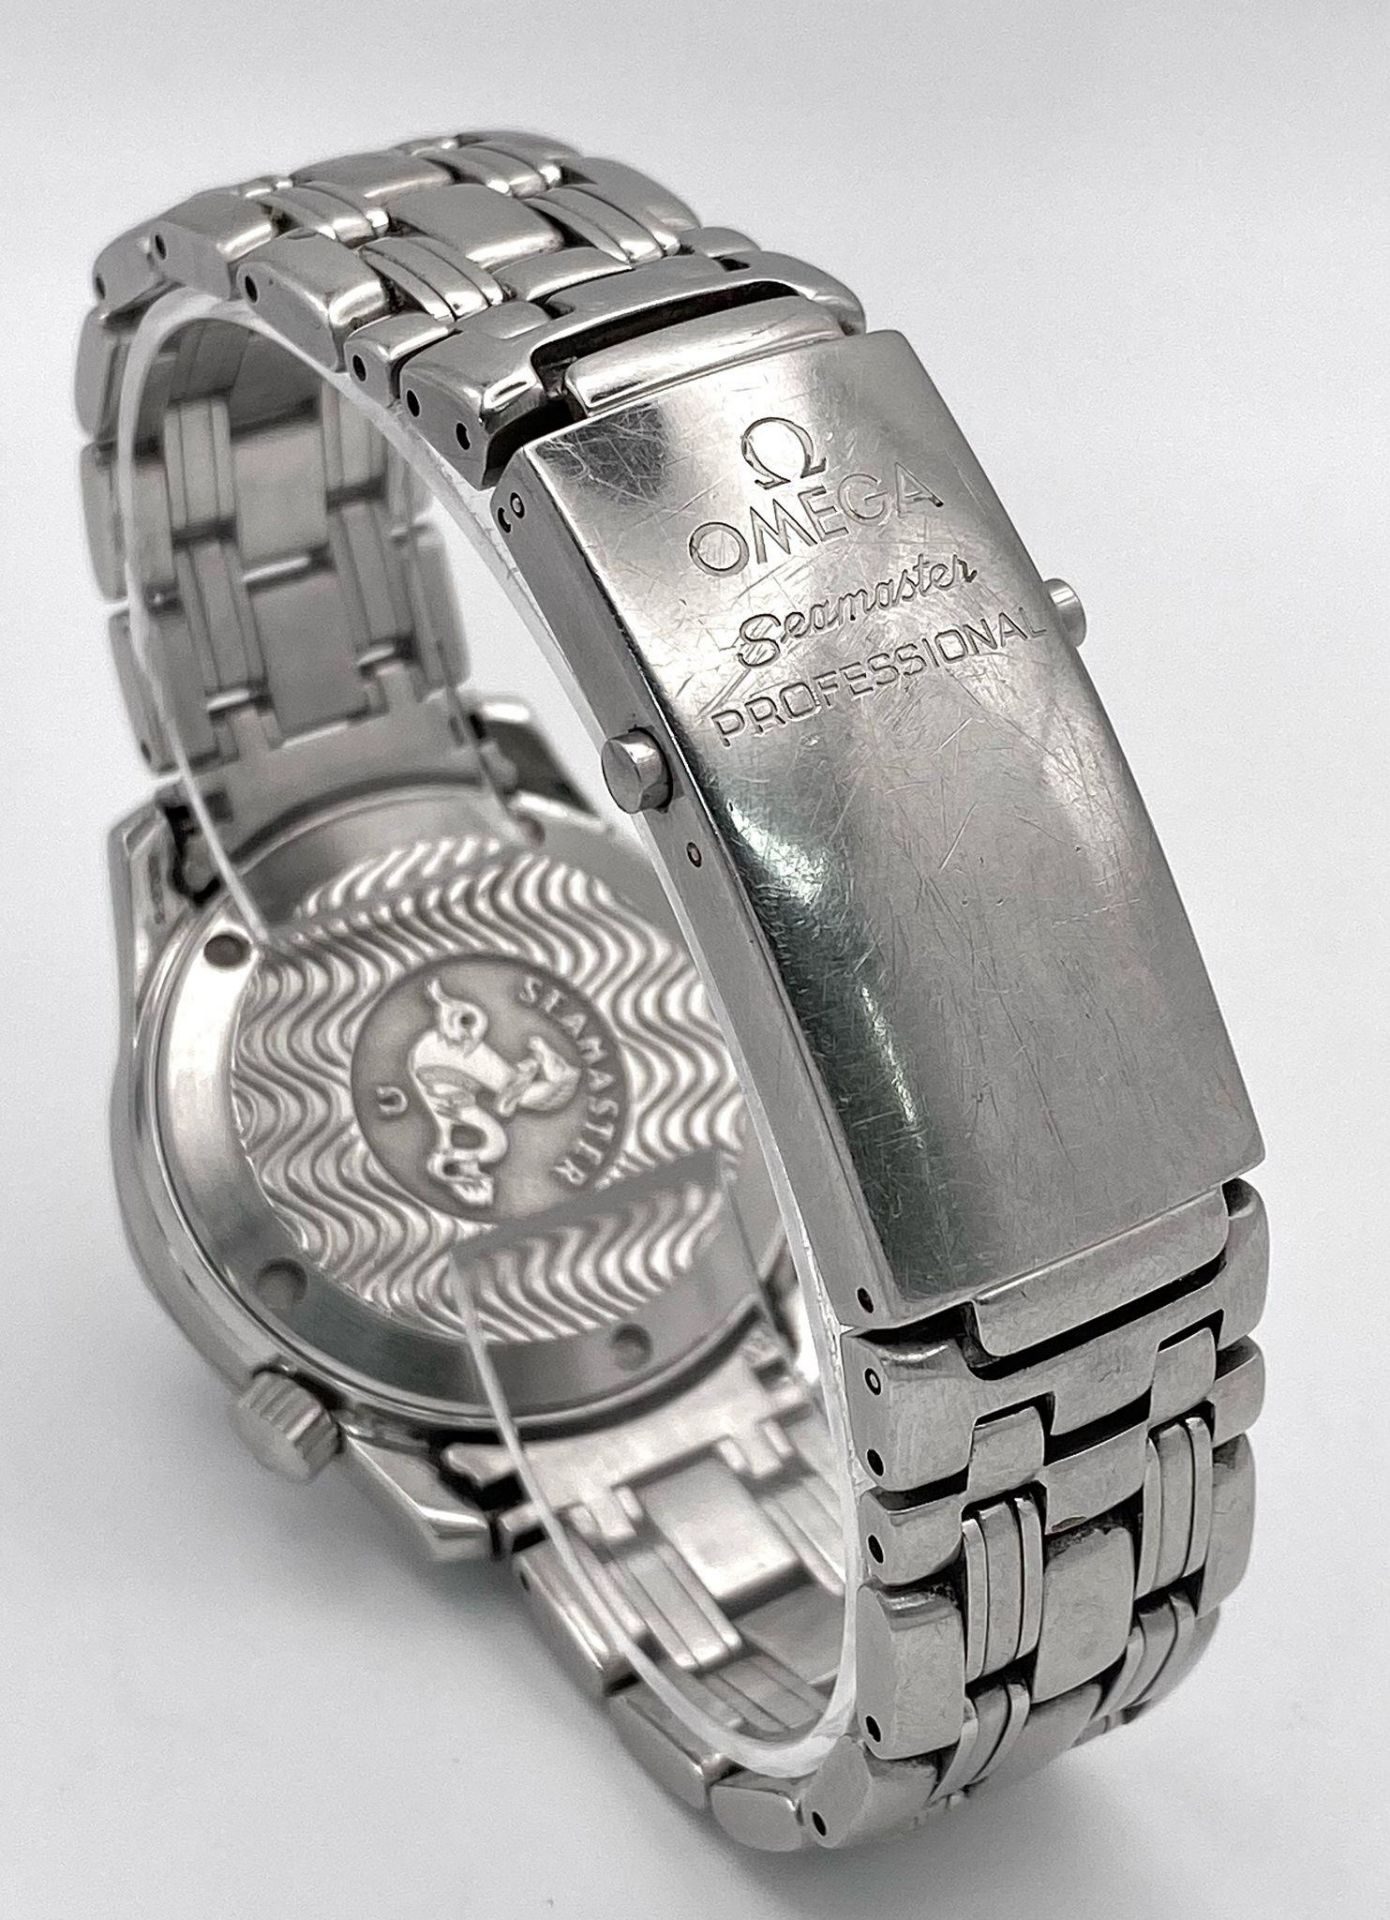 An Omega Seamaster Professional Quartz Divers Watch. Stainless steel bracelet and case - 37mm. - Image 6 of 9